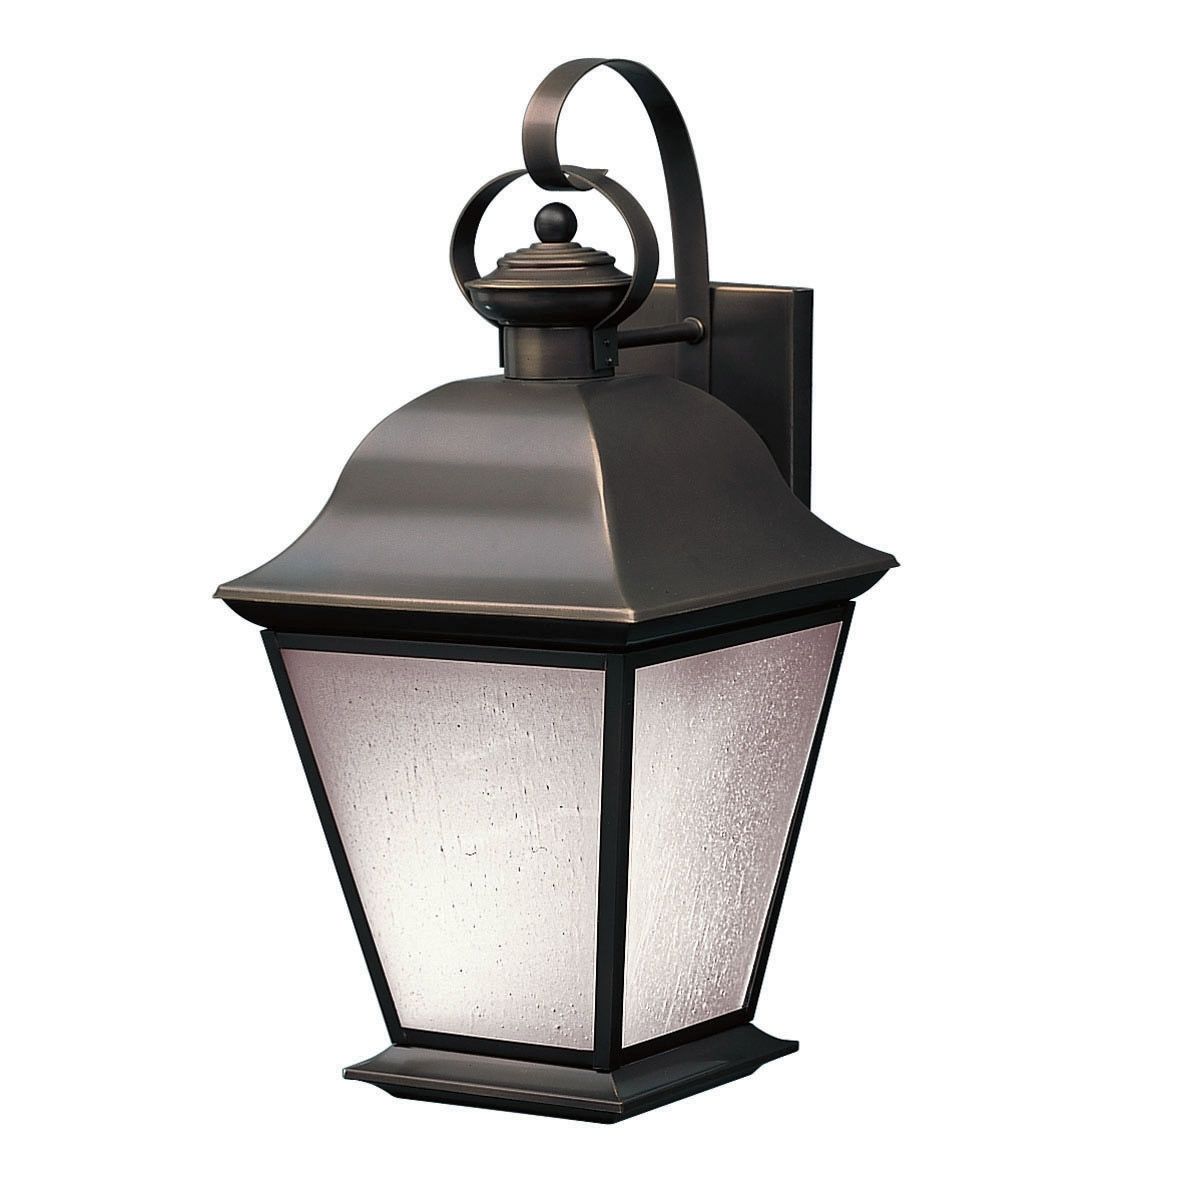 Wall Lights Design: Solar Wall Mounted Outdoor Lights In, Solar Inside Outdoor Mounted Lanterns (View 8 of 20)